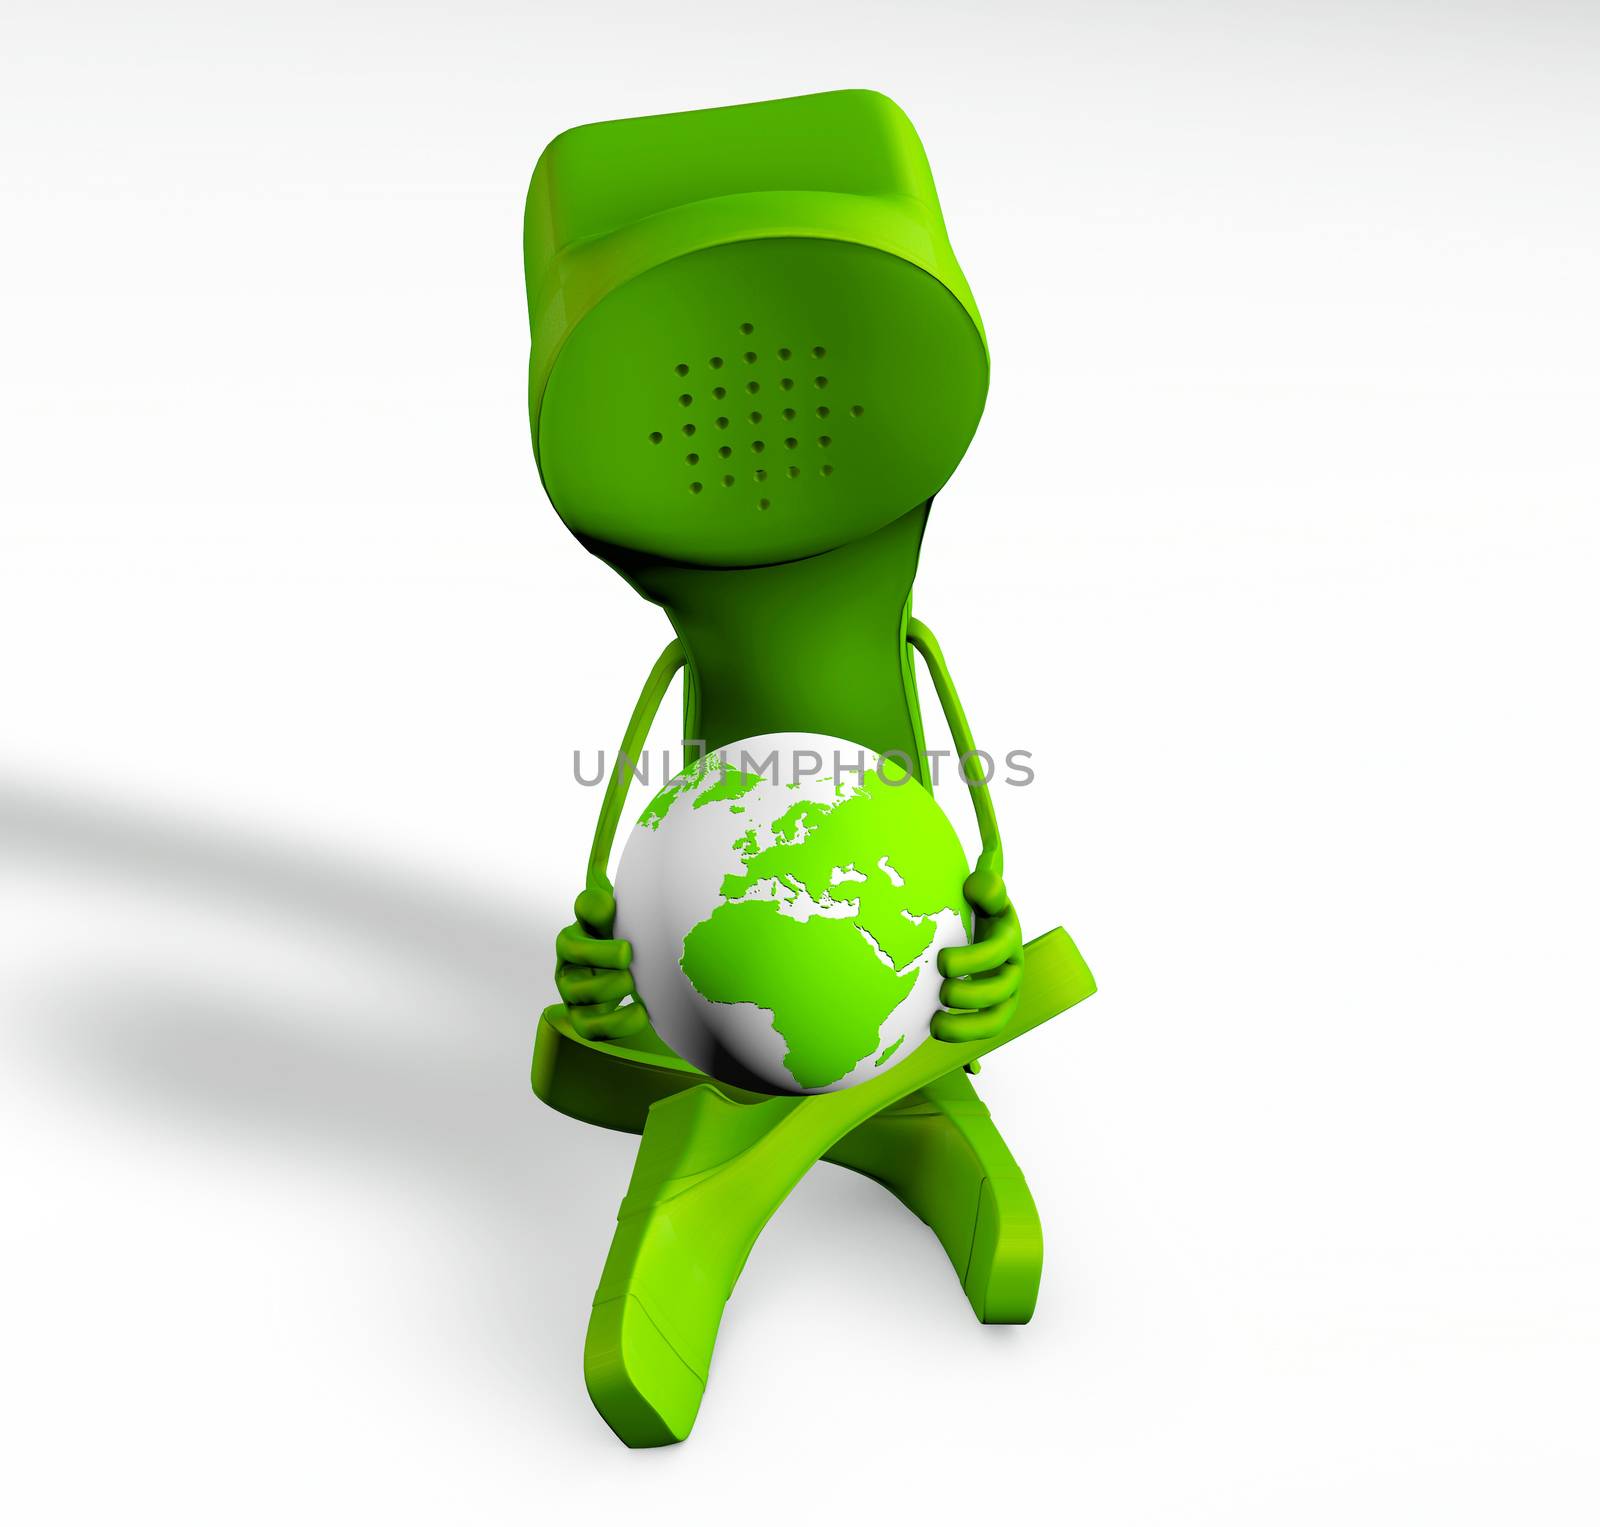 3d rendering of a telephone character holding the globe in his hands isolated on white